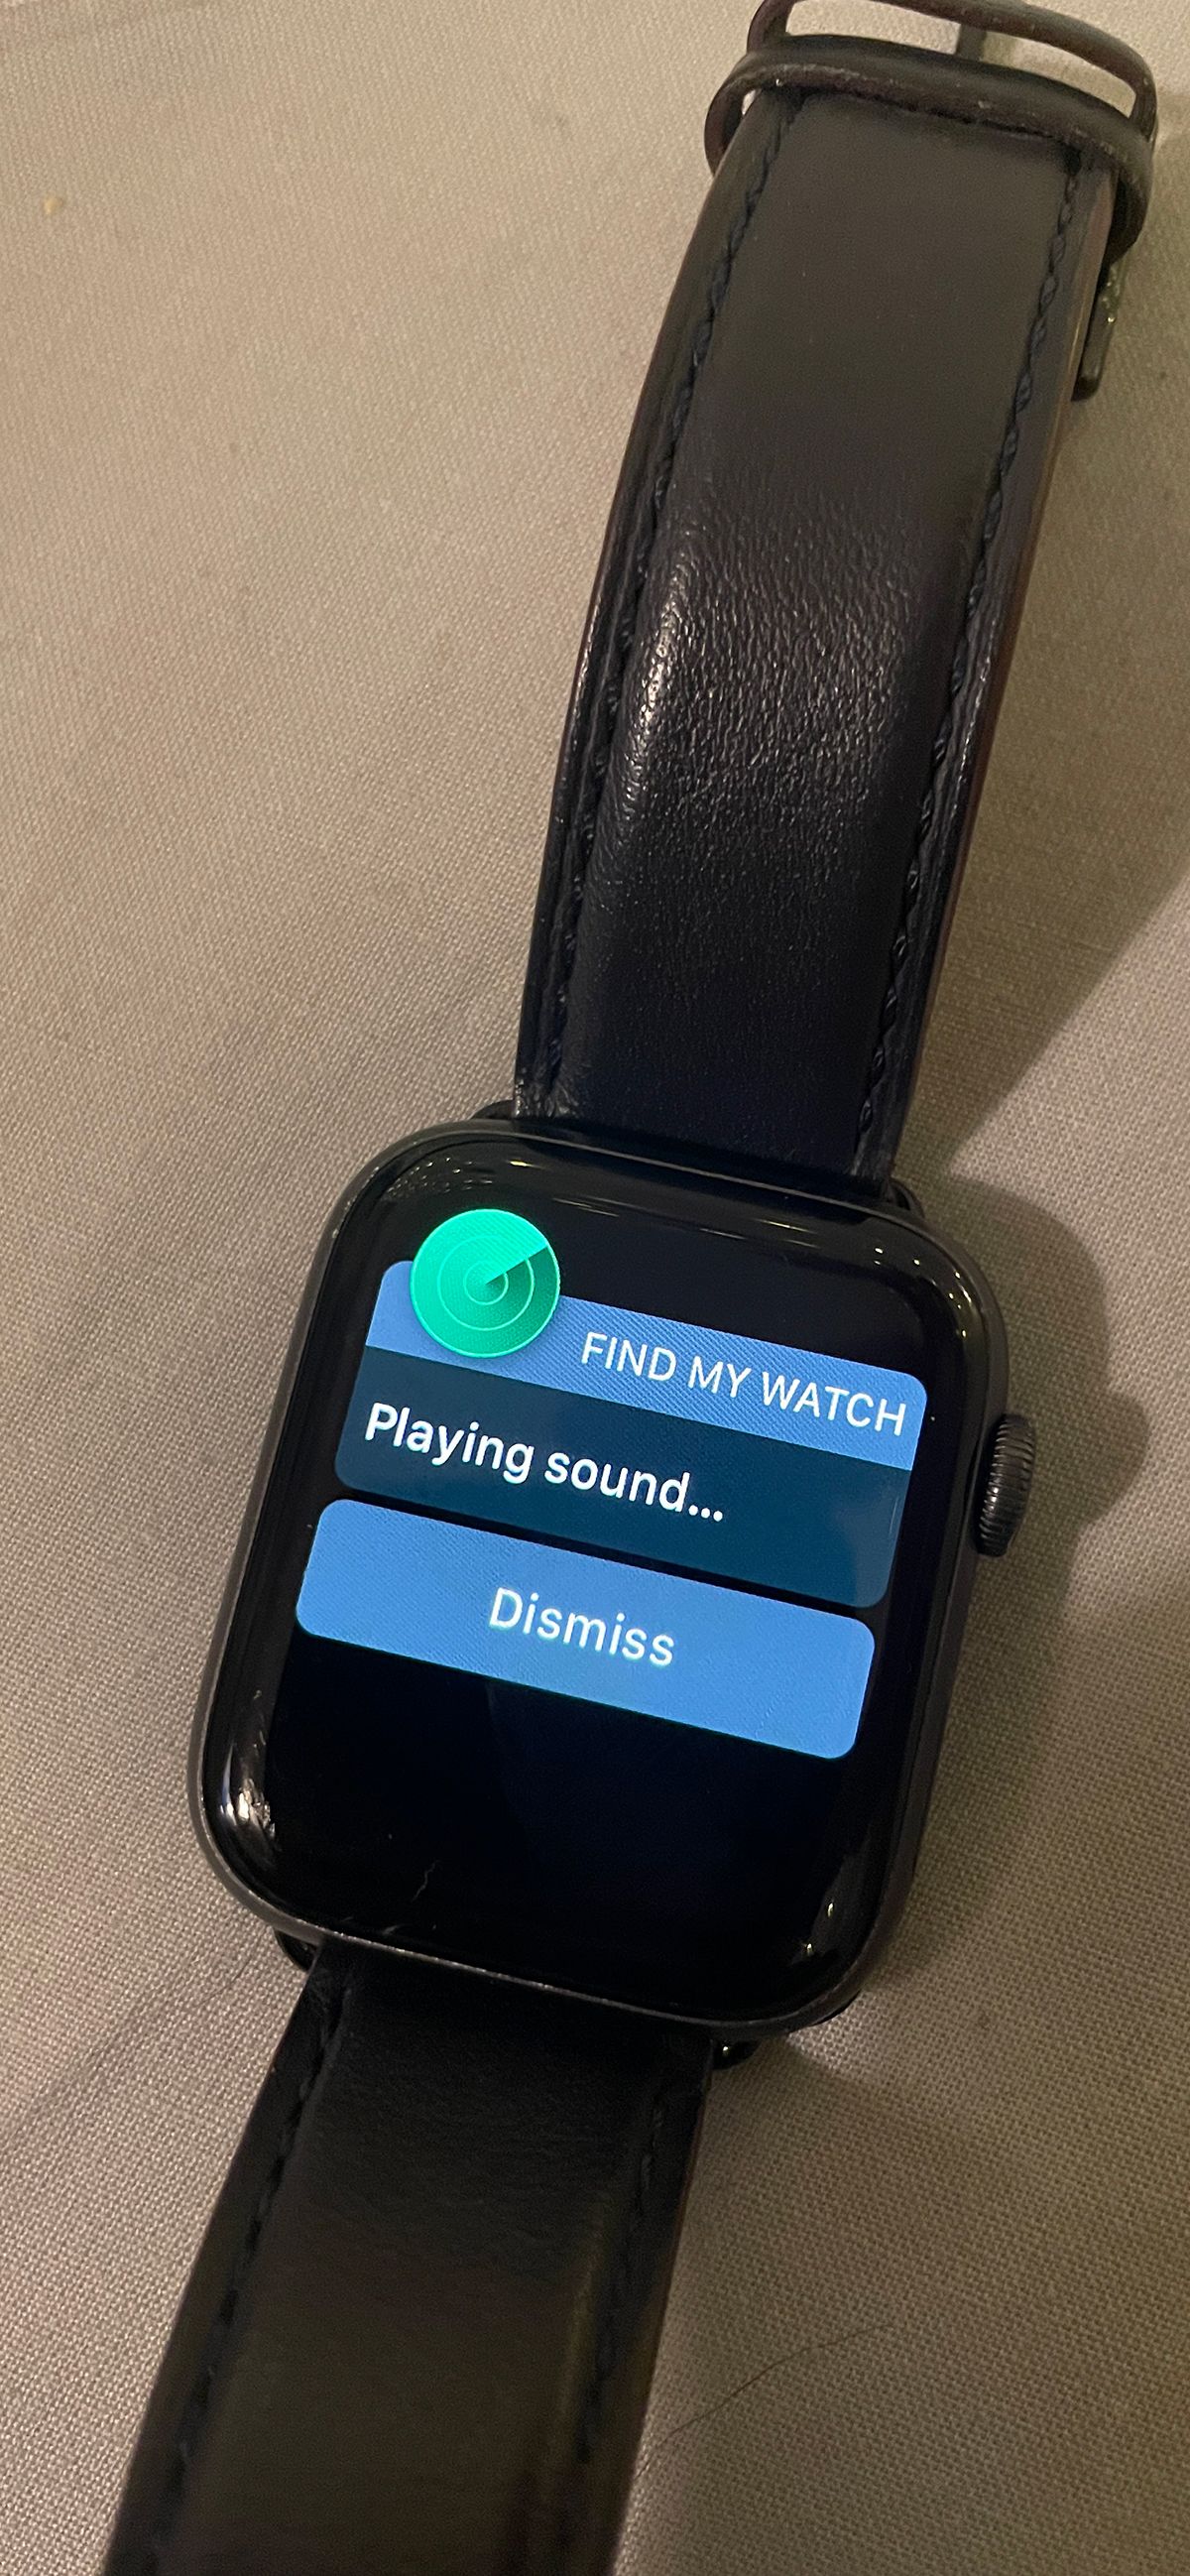 Sound played on Apple Watch